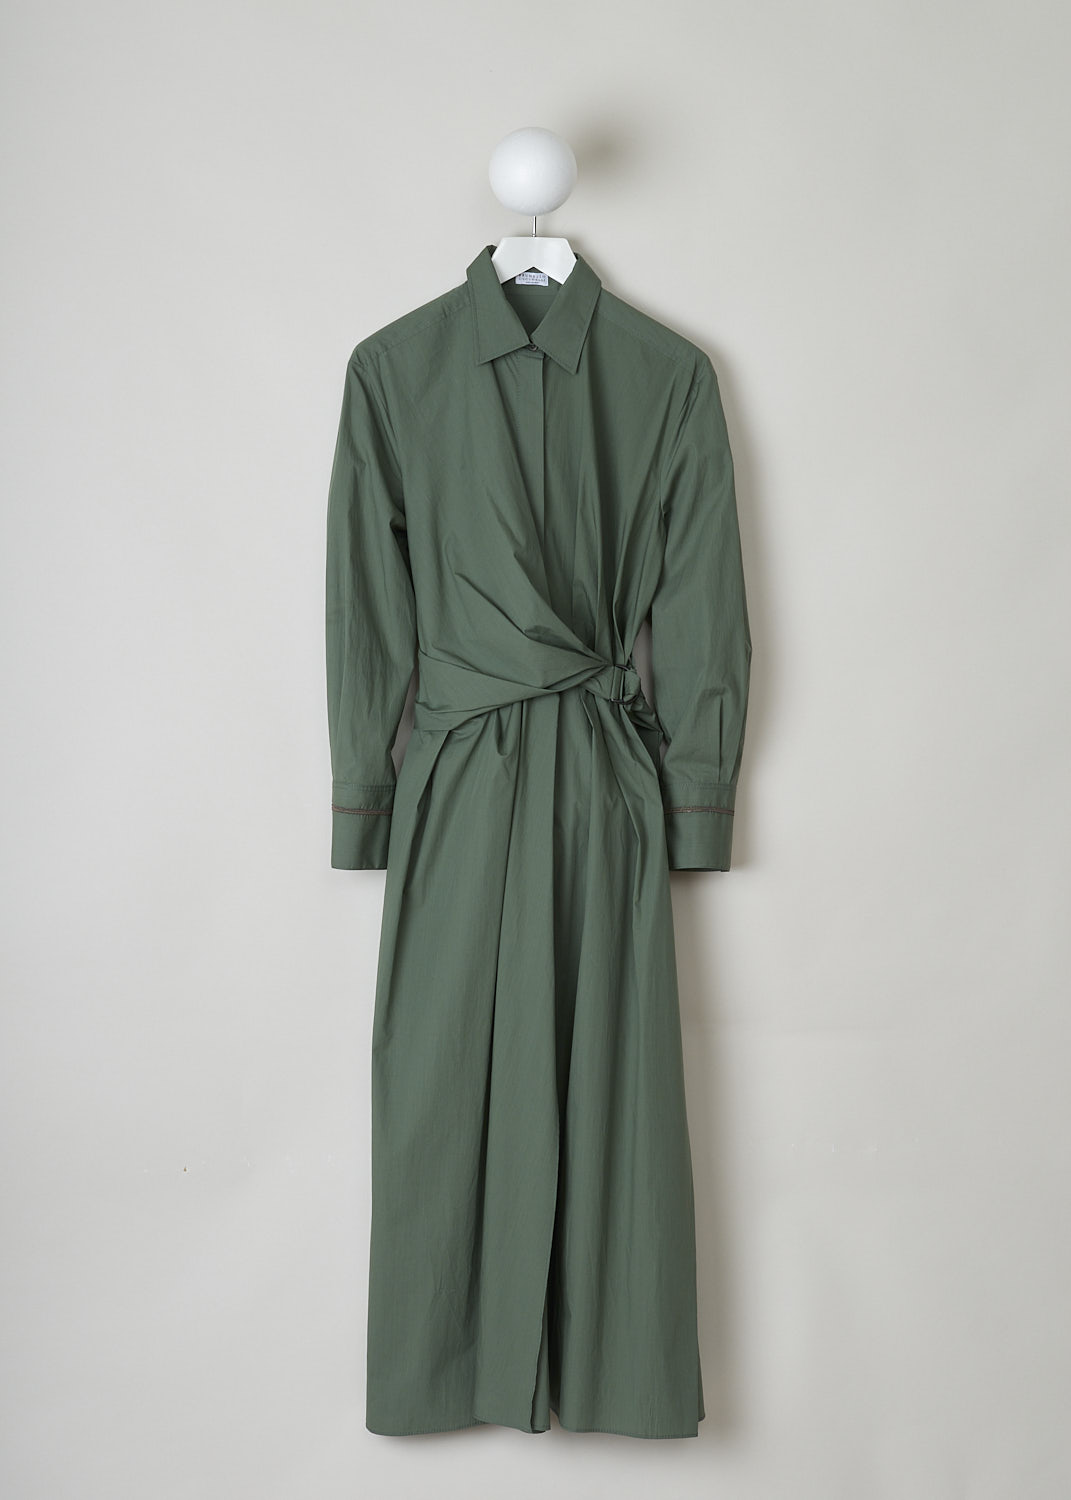 BRUNELLO CUCINELLI, GREEN SHIRT DRESS WITH WRAP DETAIL, M0H93A4873_C8625, Green, Front, This green midi shirt dress has a classic collar and concealed front button closure that goes down to the waistband. The waistband is elasticated at the back. The waist is accentuated by the wrap detail, that goes around like a belt and is fastened to one side with the metal buckle. The long sleeves have buttoned cuffs and are decorated with a monili beaded trim.
